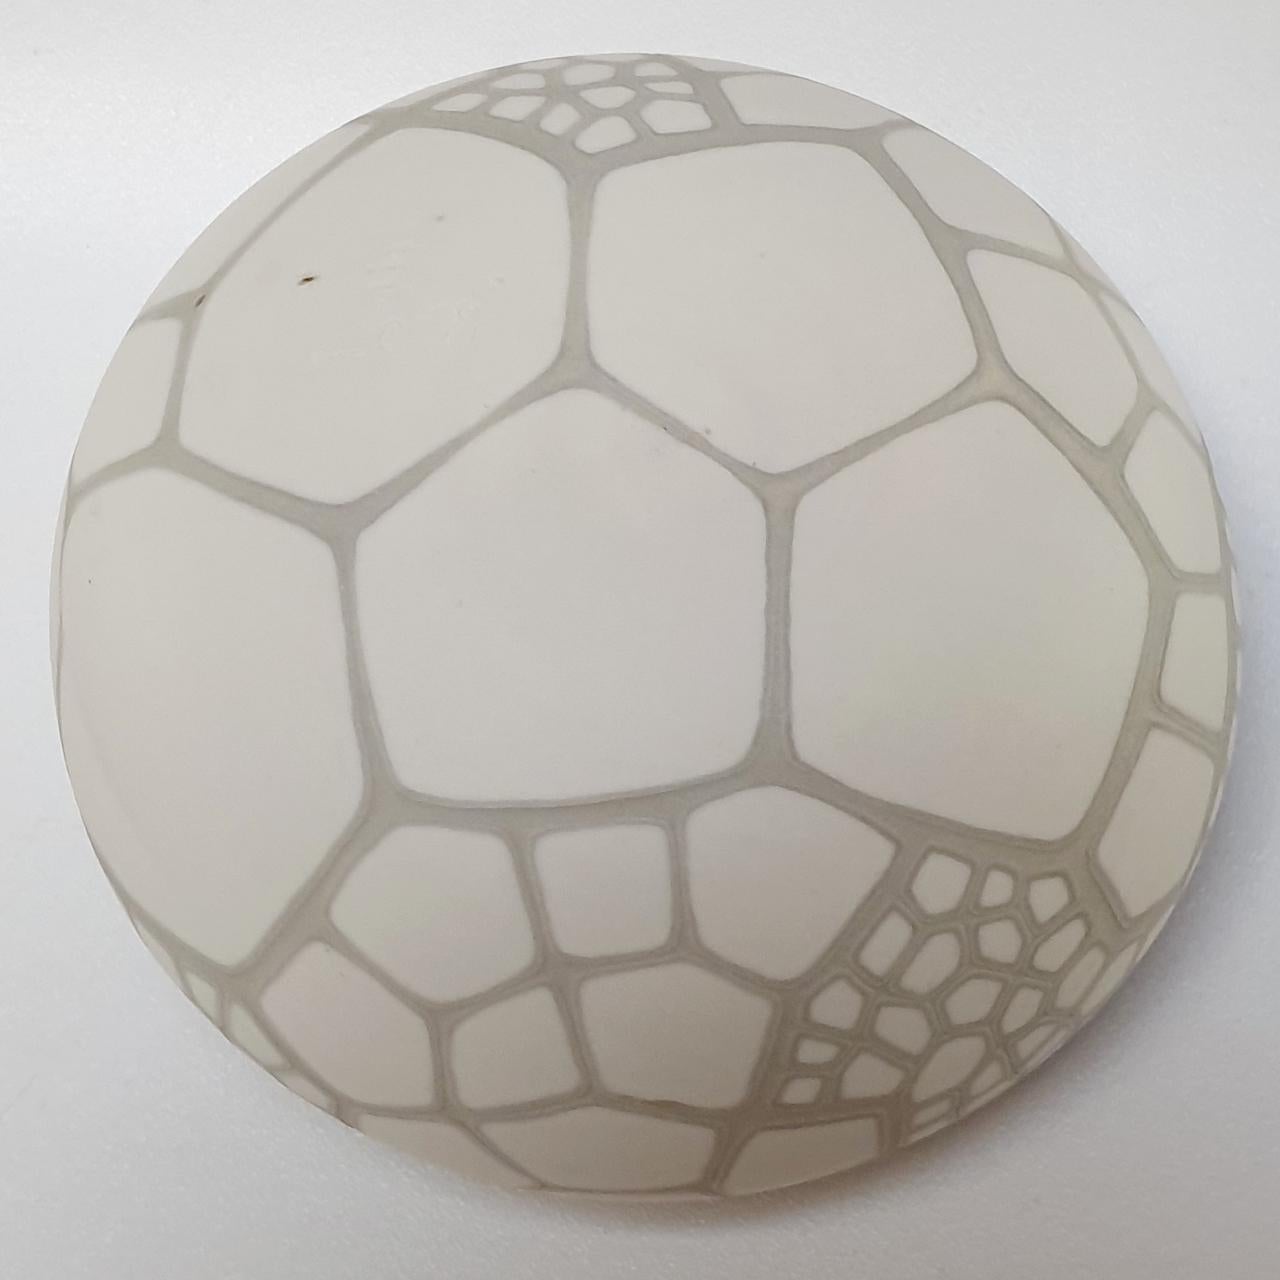 Objekt gemustert is a one-of-a-kind contemporary modern porcelain object by German artist Petra Benndorf. The object is made on the traditional potter’s wheel and patterned through the use of shellac and salts such as iron chlorides. Work is signed